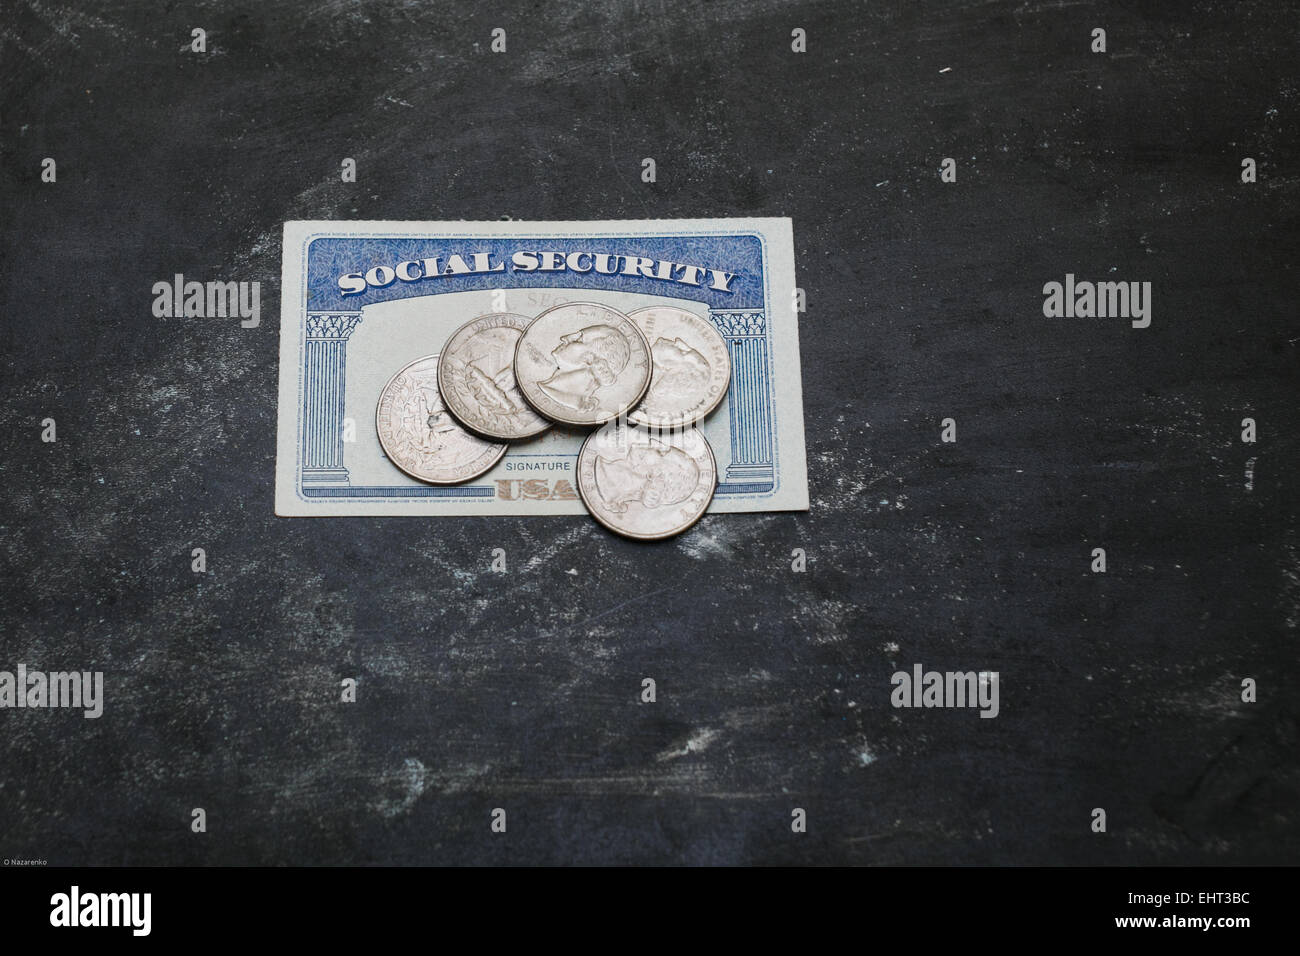 Social security card with coins on it, black background. Stock Photo